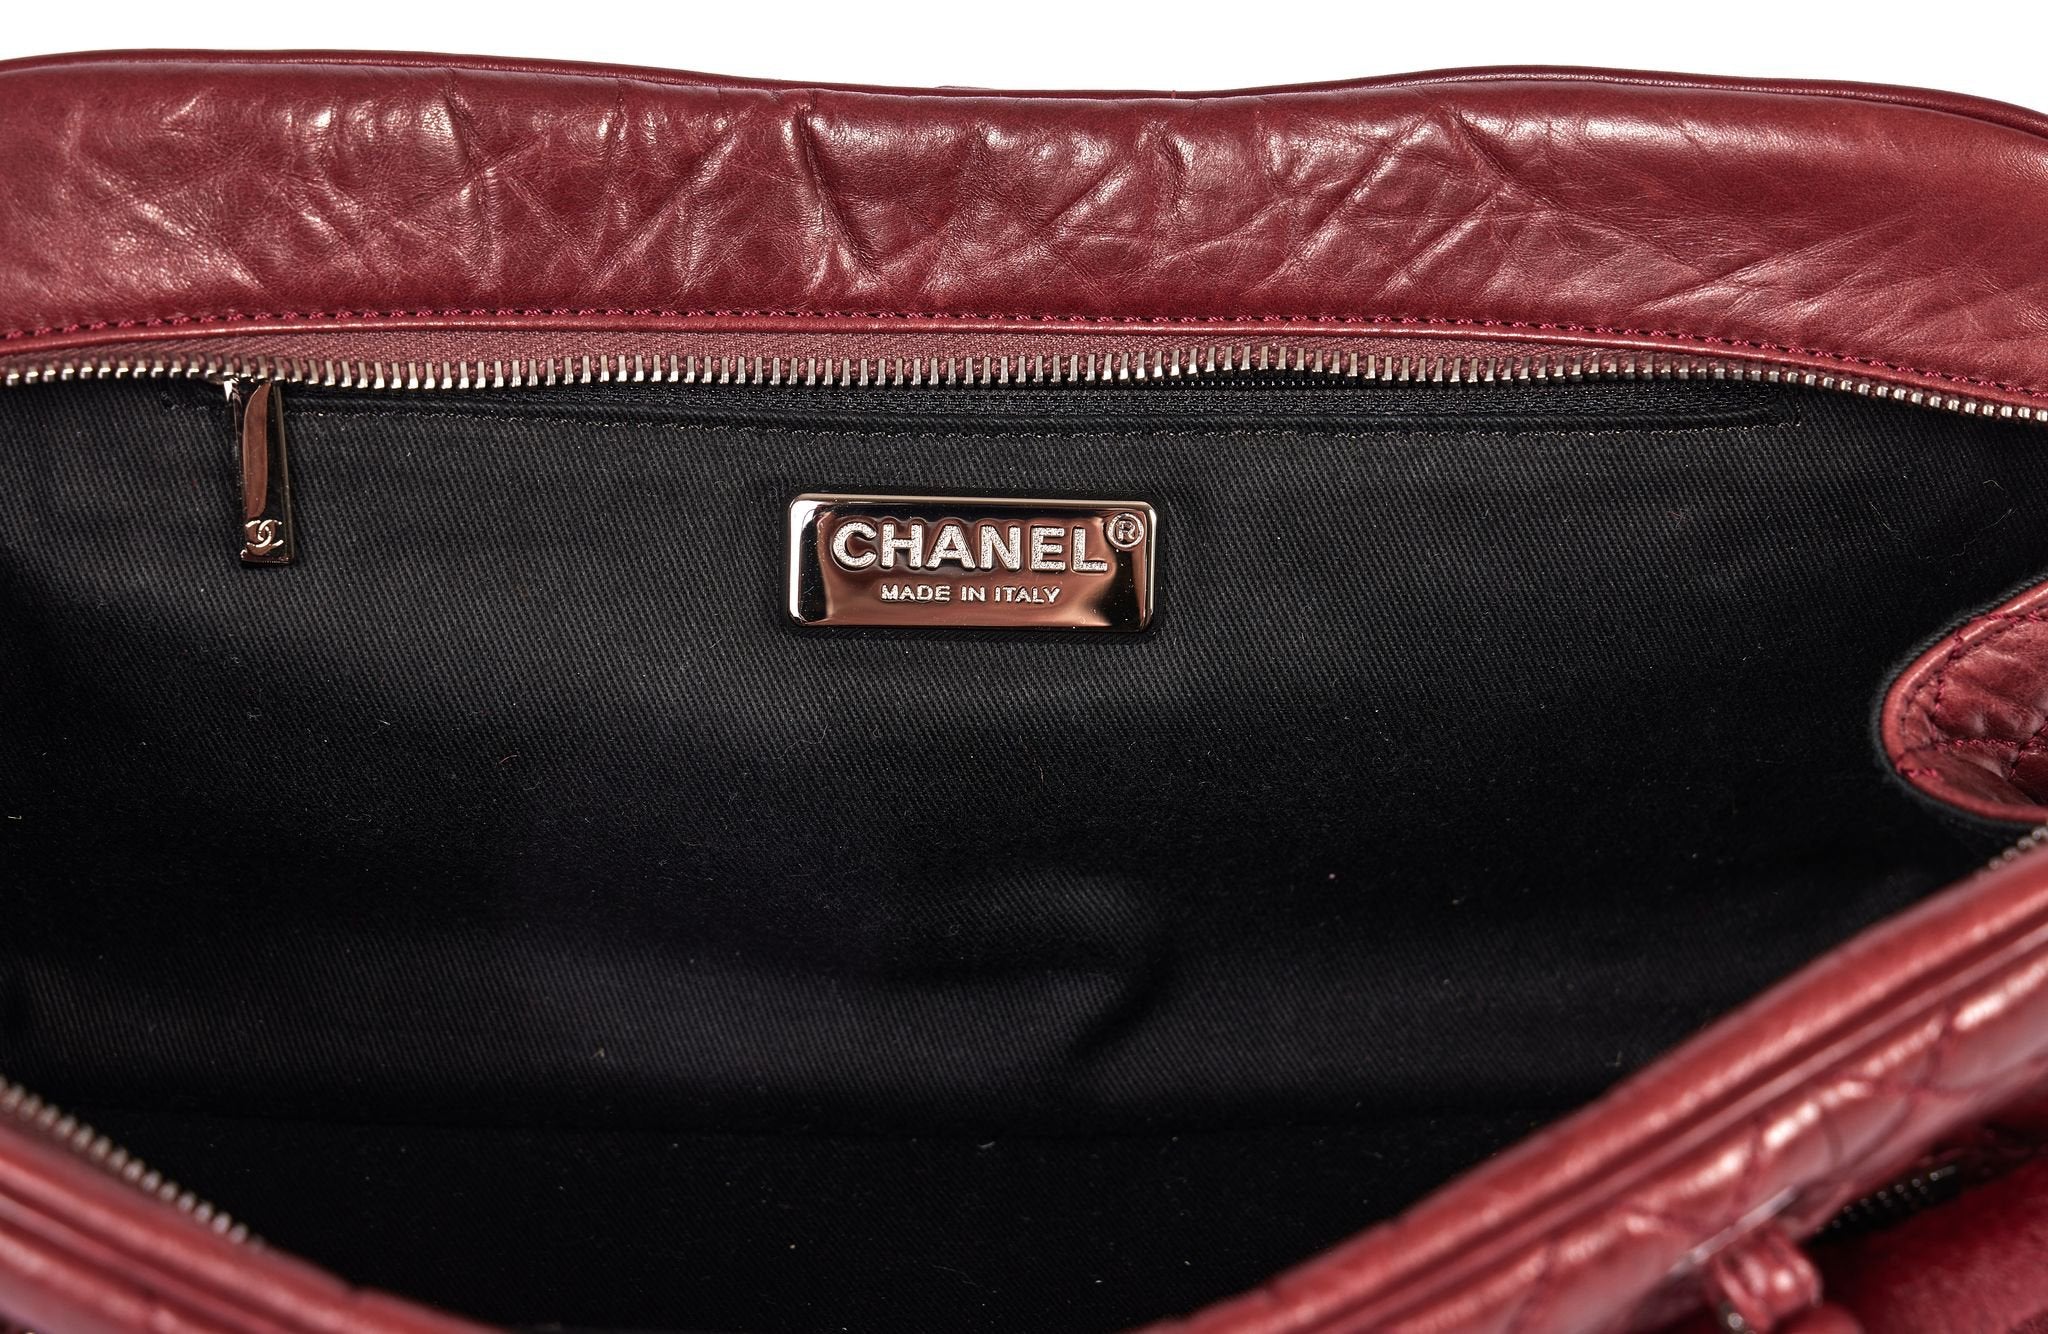 Chanel Chic Burgundy Quilted Caviar Tote Bag - BOPF